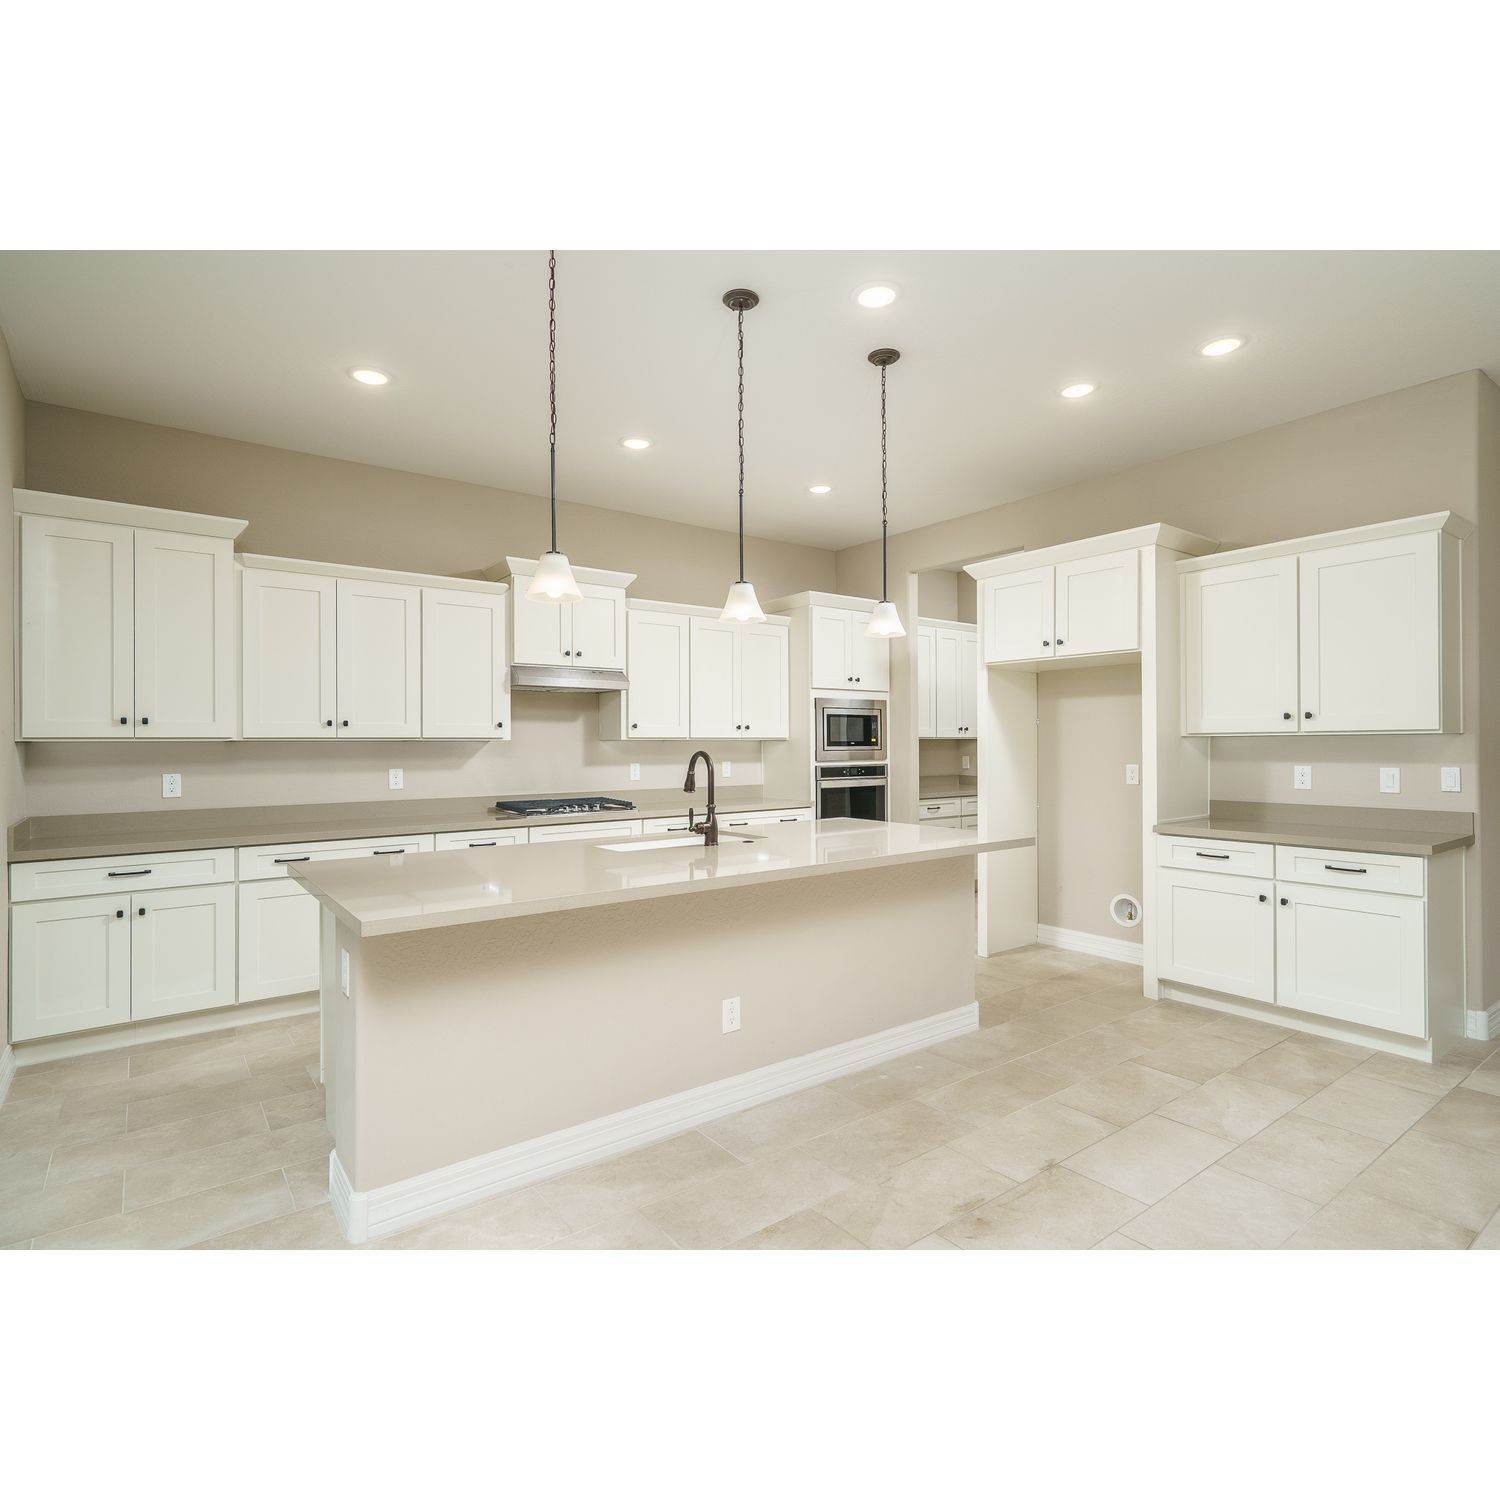 31. Single Family for Sale at Harmony At Montecito In Estrella 18624 W Cathedral Rock Drive, Goodyear, AZ 85338